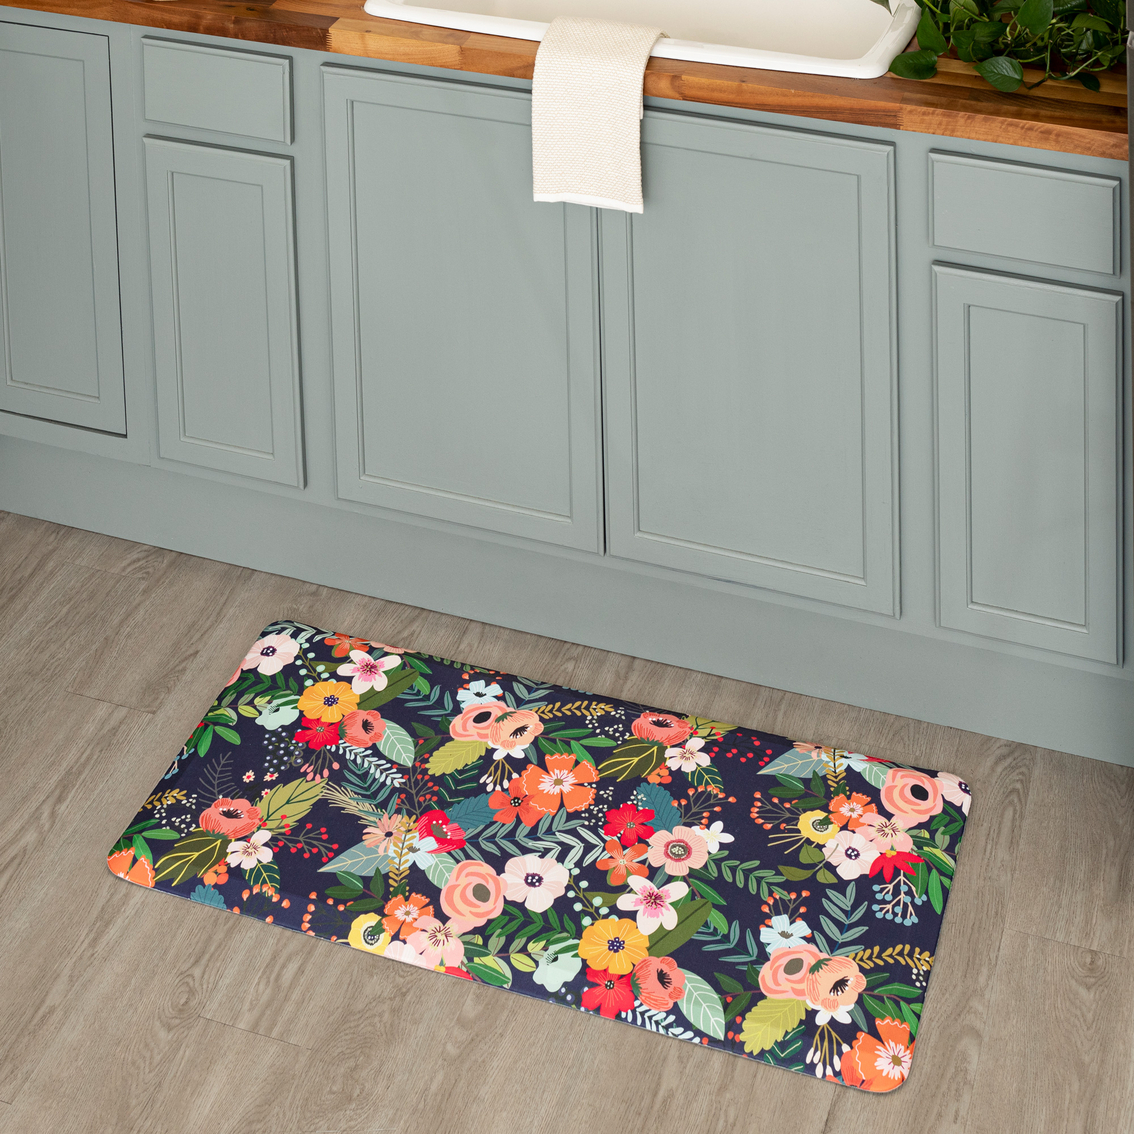 Mohawk Home Dri Pro Blooming On Kitchen Mat - Image 2 of 2